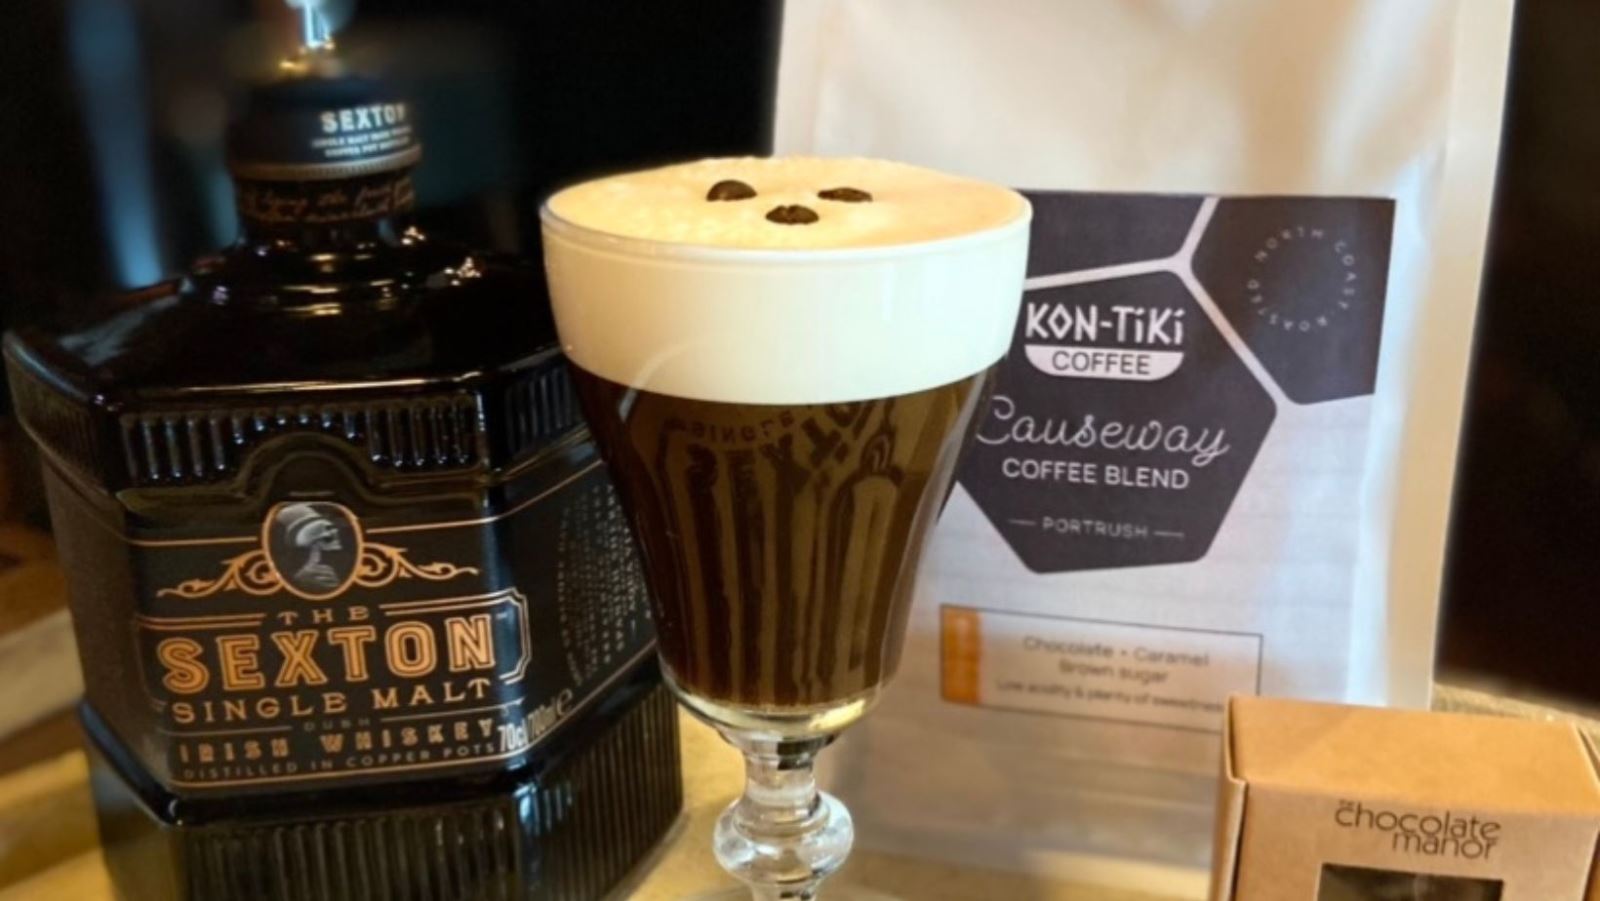 Image of a large Irish coffee in a glass with a bottle of whiskey, chocolates and coffee beside it on the table.